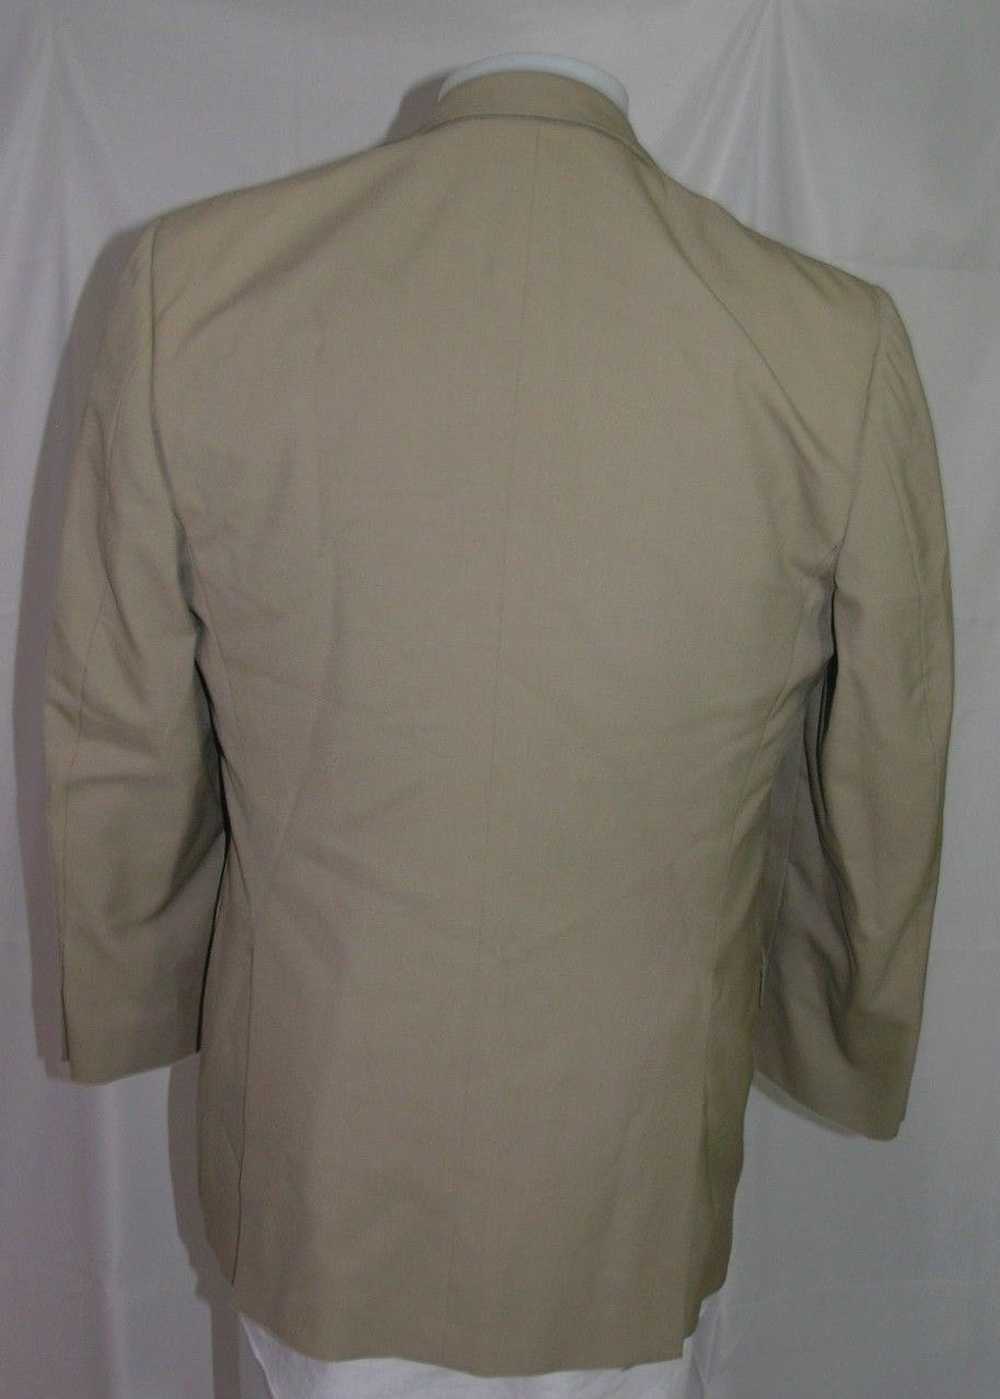 Alfred Dunhill Bespoke Two Button Blazer 40R - image 7